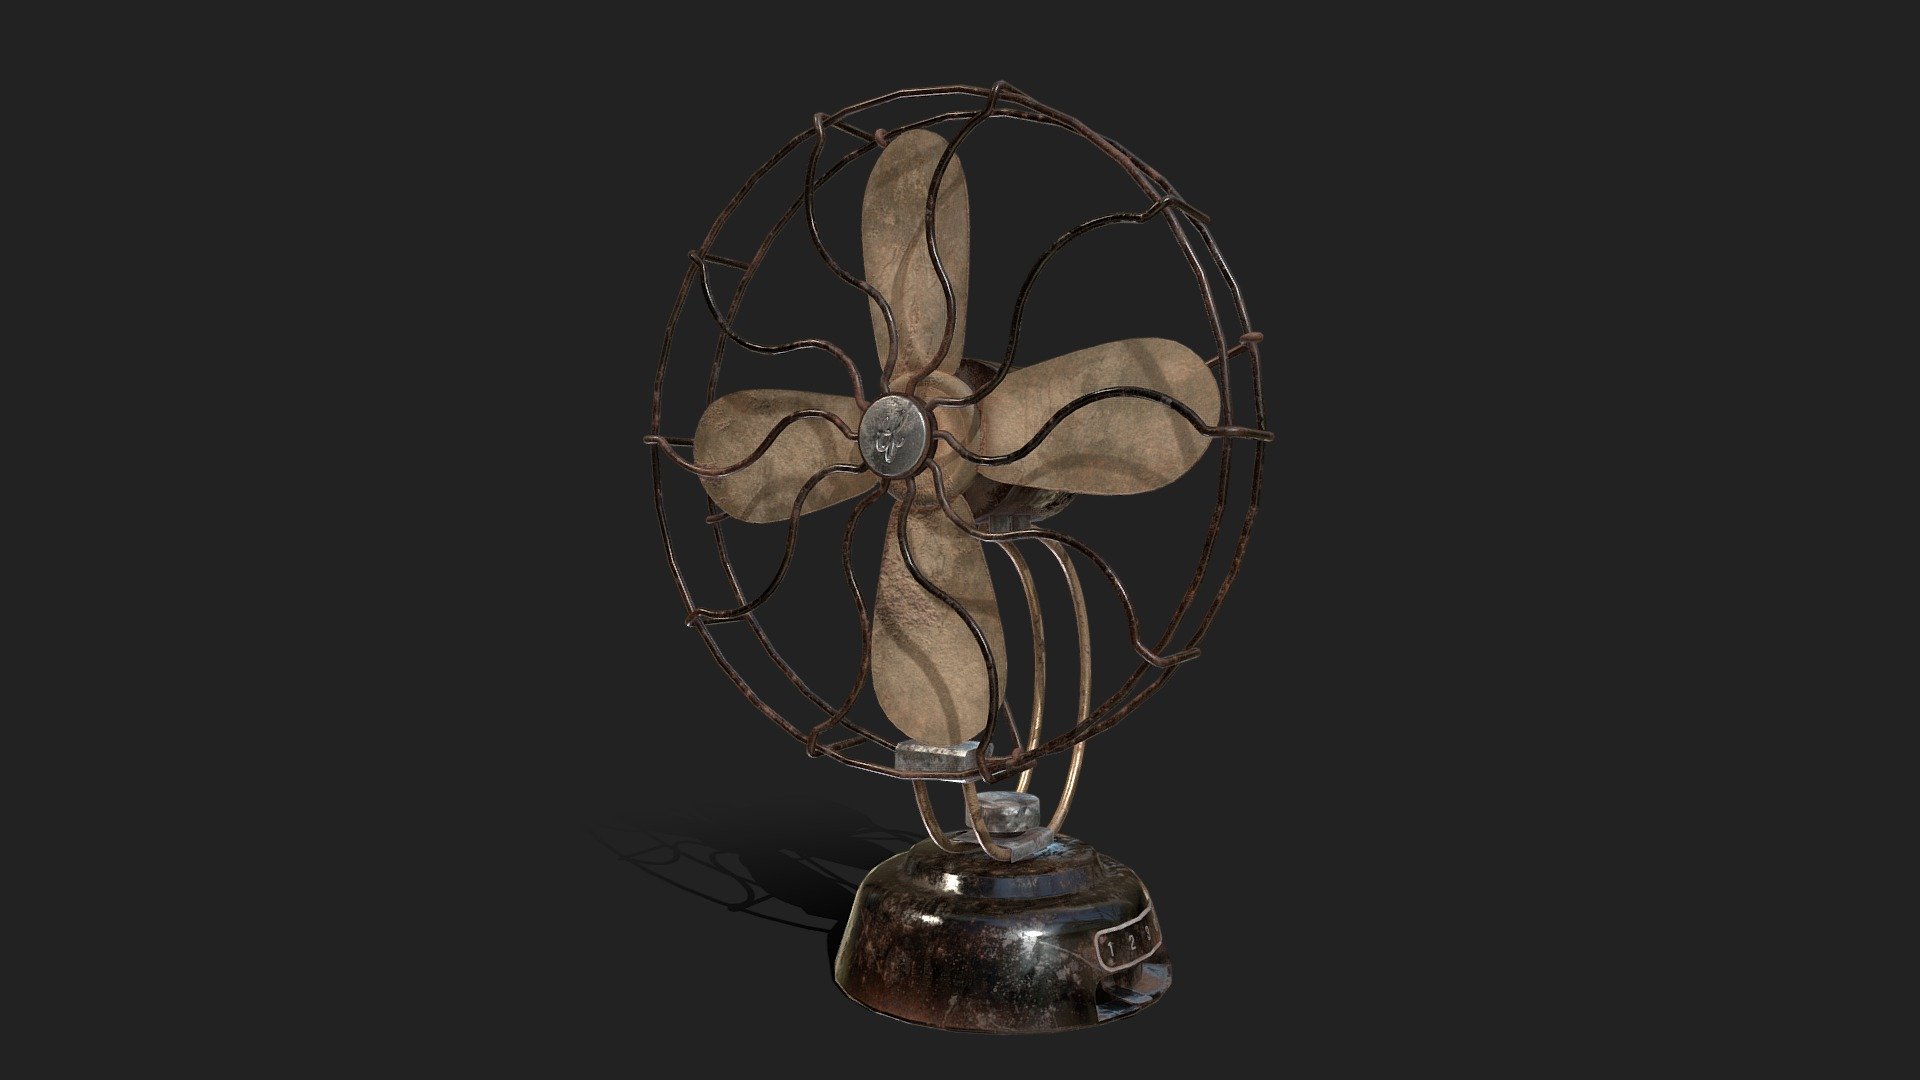 Fan blades animated.

2048x2048 texture packs (PBR Metal Rough, Unity HDRP, Unity Standard Metallic and UE):

PBR Metal Rough: BaseColor, AO, Height, Normal, Roughness and Metallic;

Unity HDRP: BaseColor, MaskMap, Normal;

Unity Standard Metallic: AlbedoTransparency, MetallicSmoothness, Normal;

Unreal Engine: BaseColor, Normal, OcclusionRoughnessMetallic;

The package also has the .fbx, .obj, .dae and .blend file 3d model